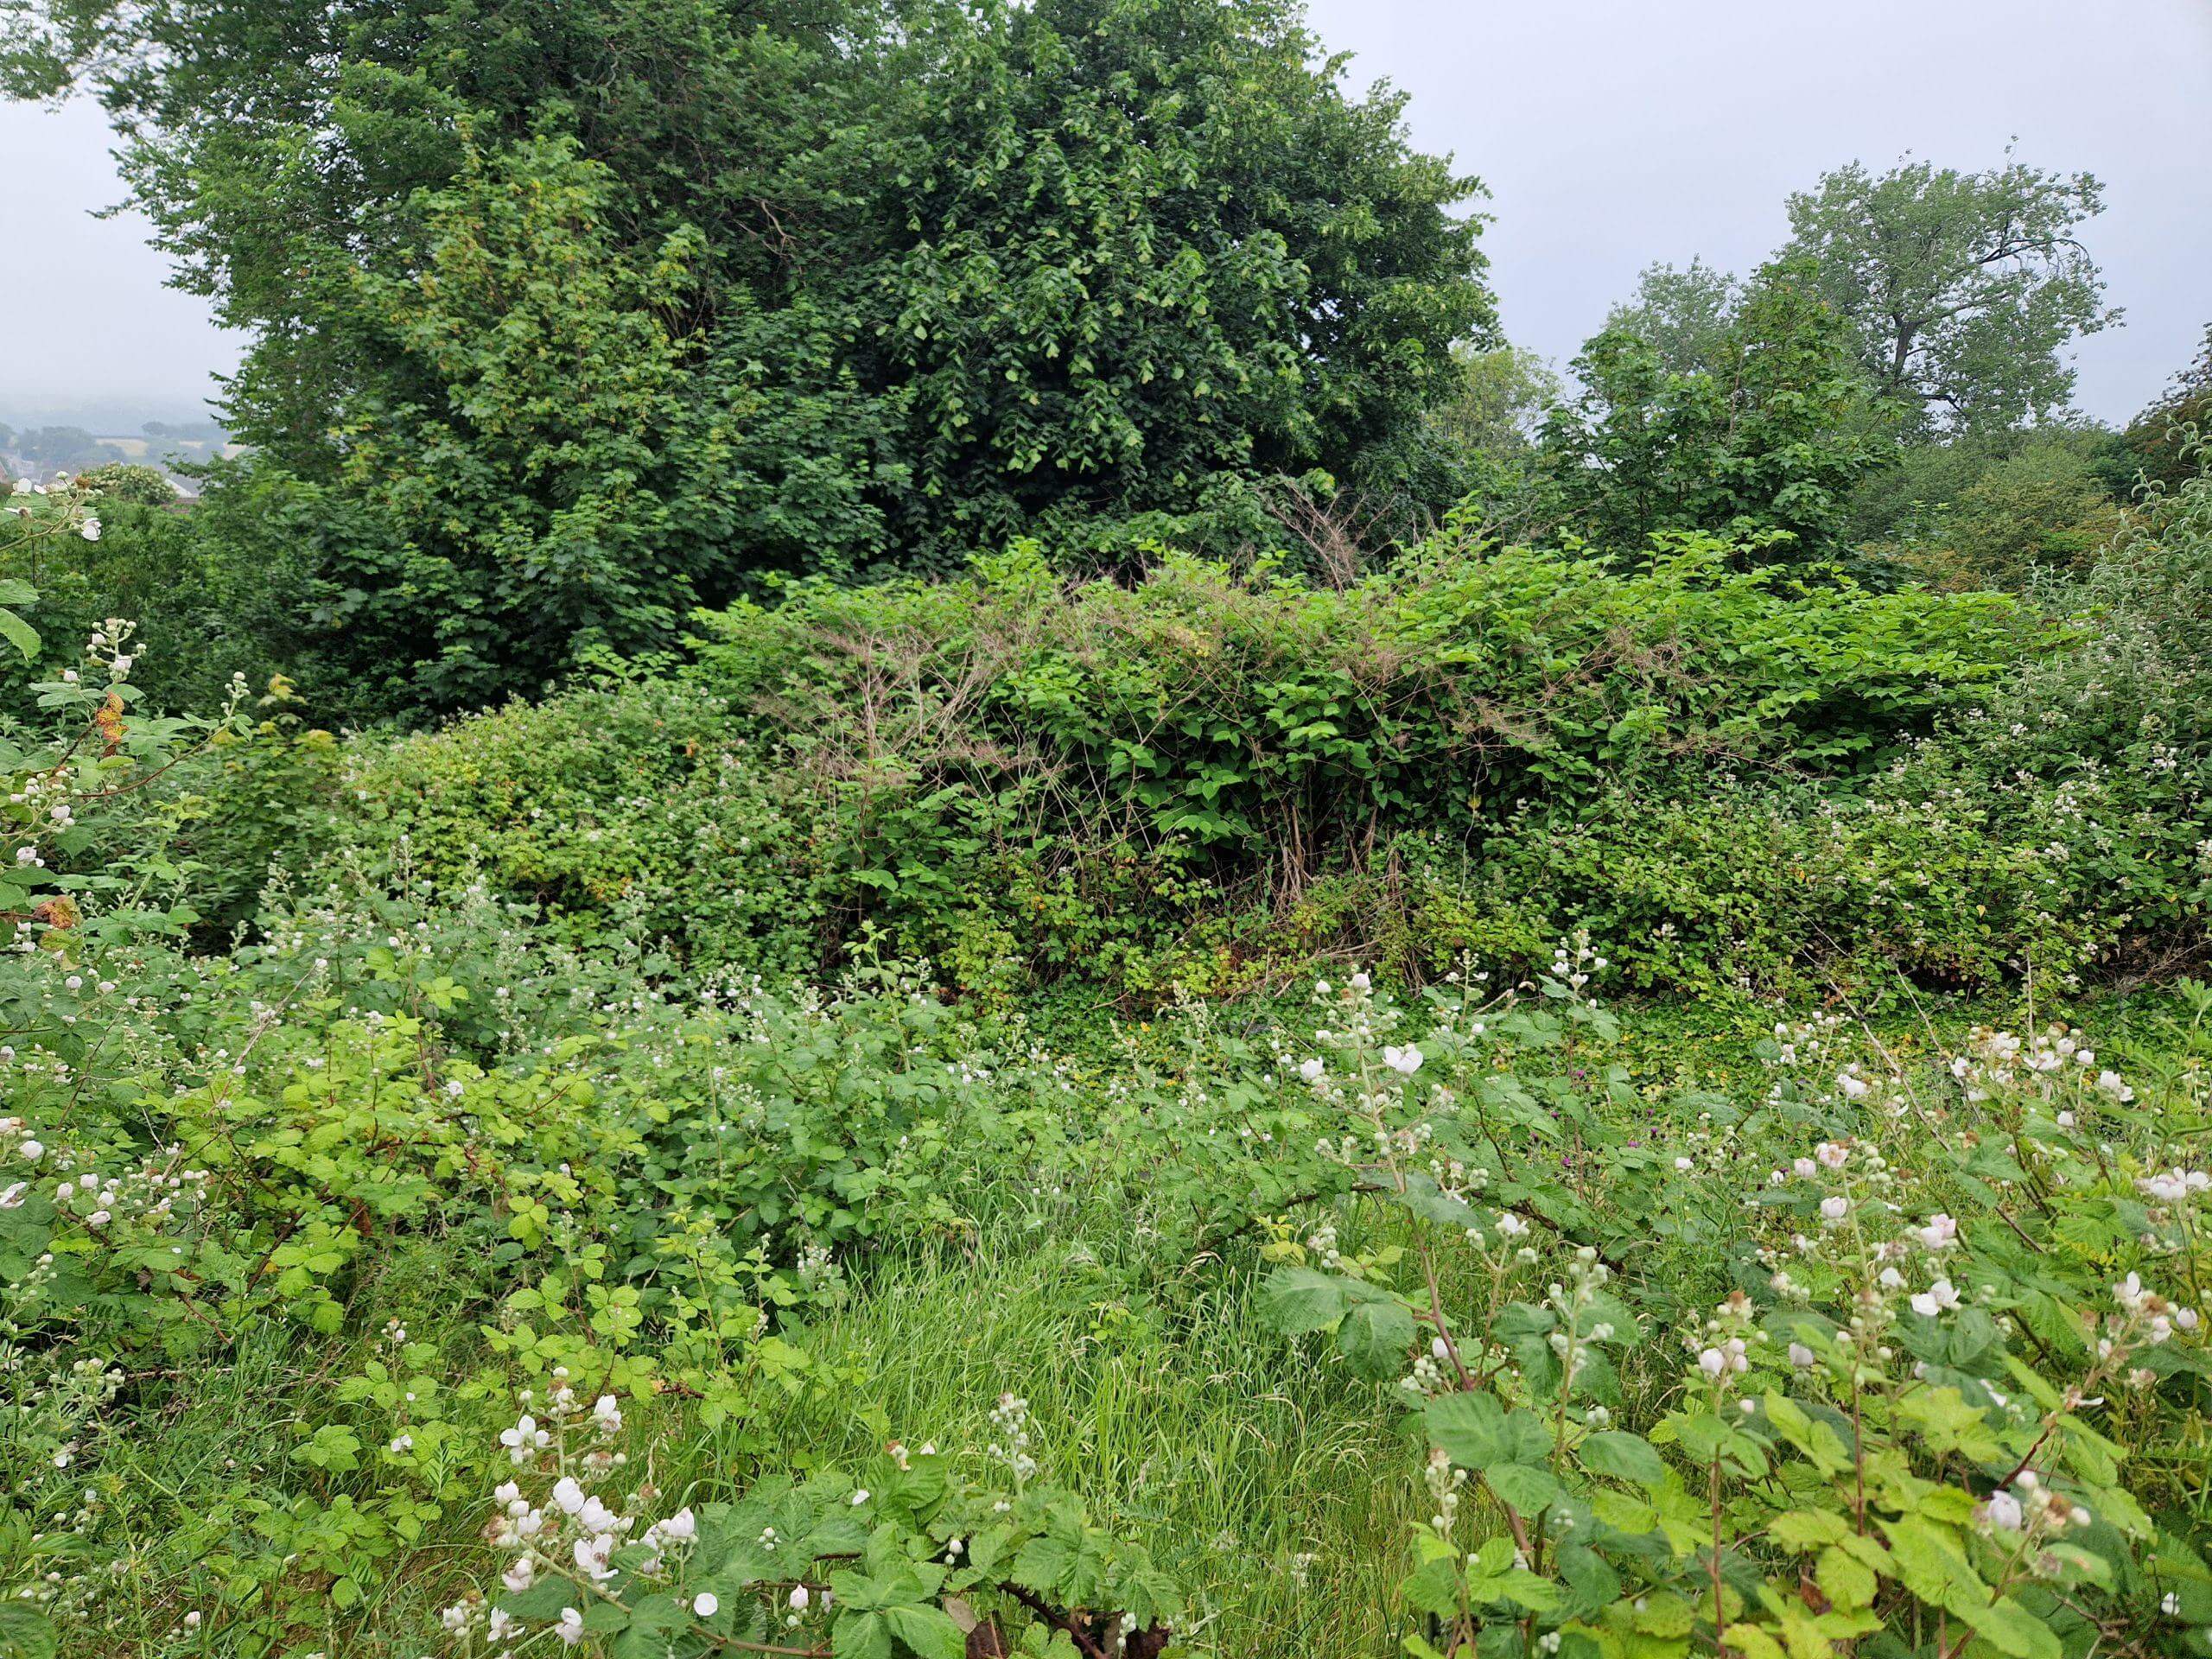 Japanese knotweed mixed in around other invasive weeds